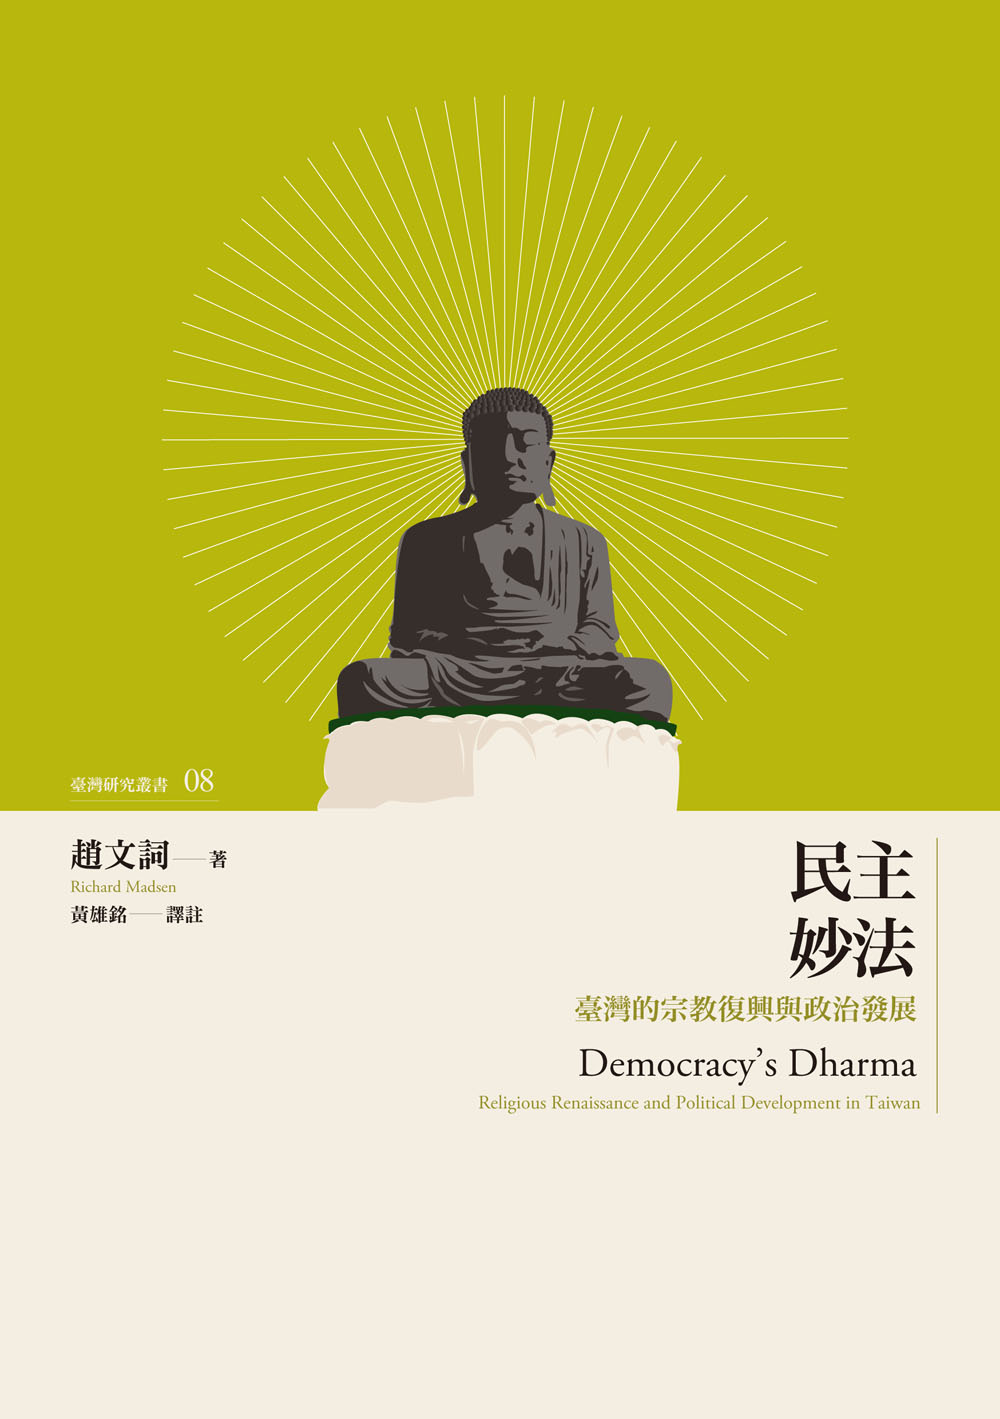 Democracy’s Dharma: Religious Renaissance and Political Development in Taiwan